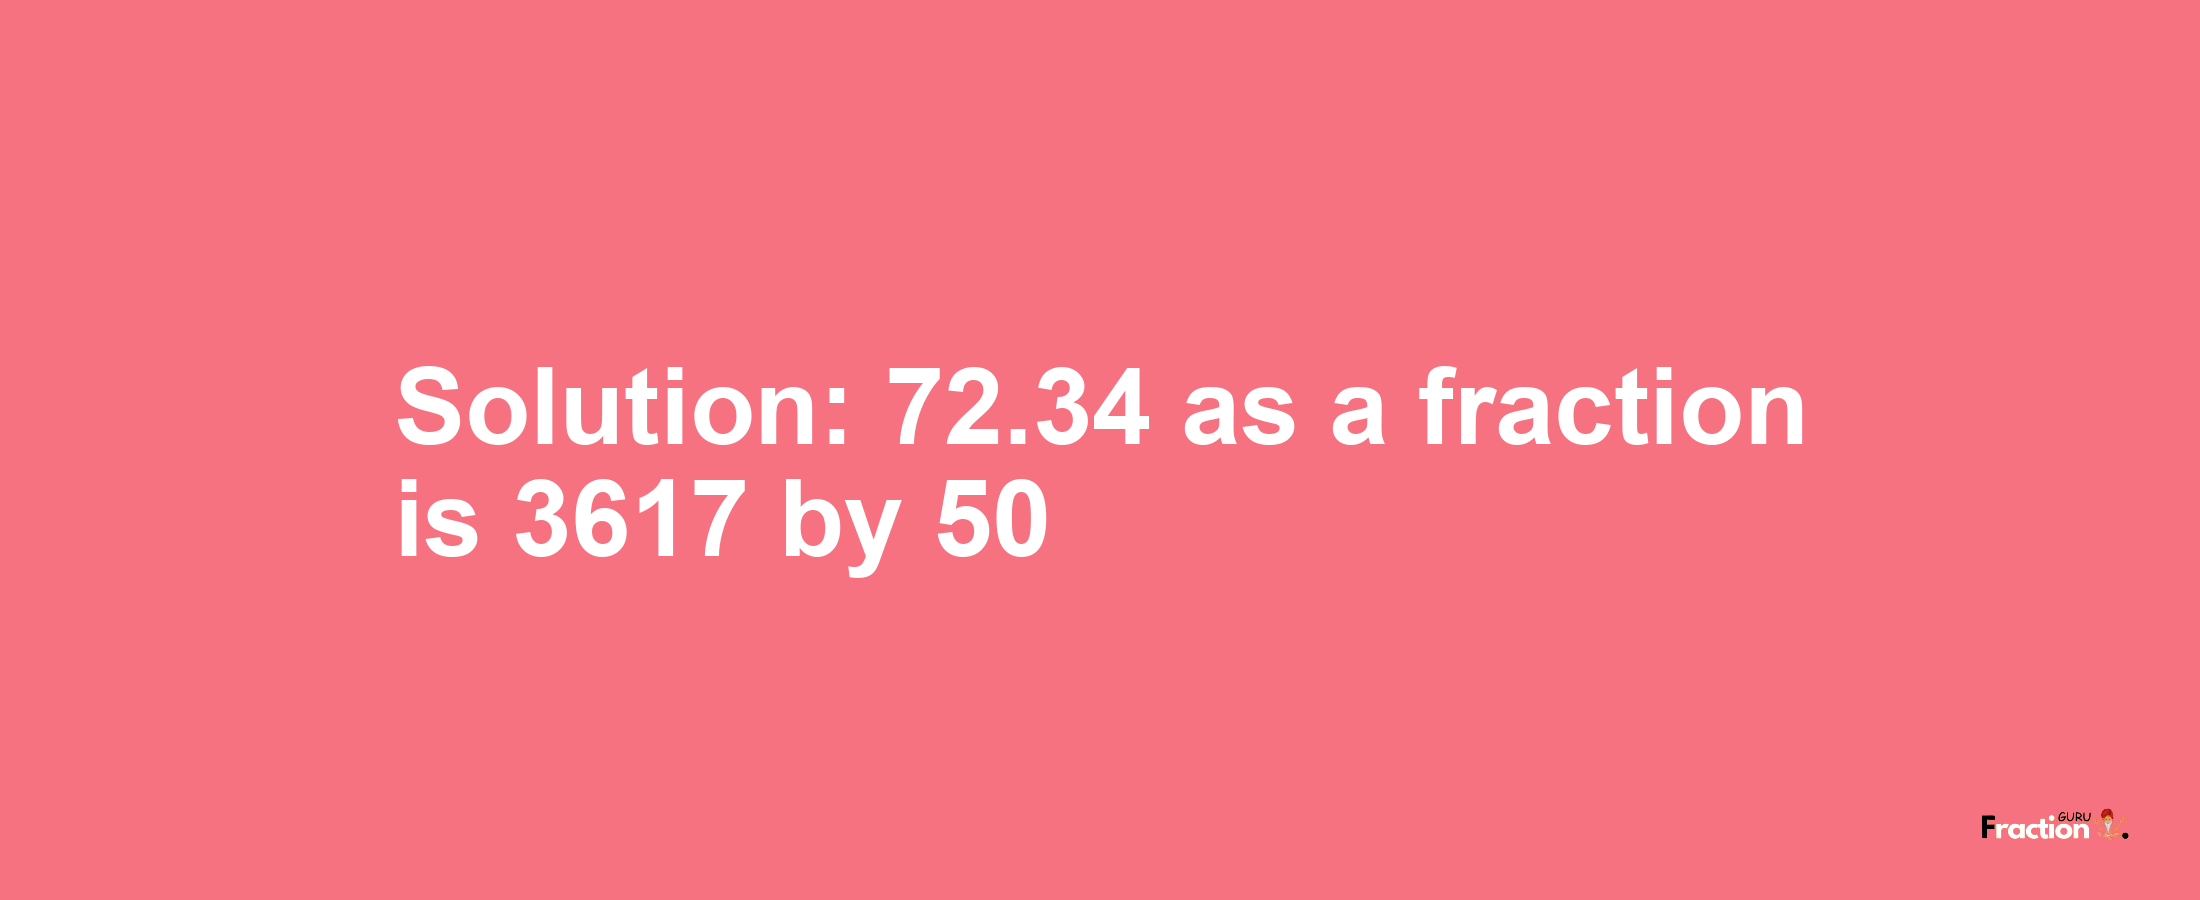 Solution:72.34 as a fraction is 3617/50